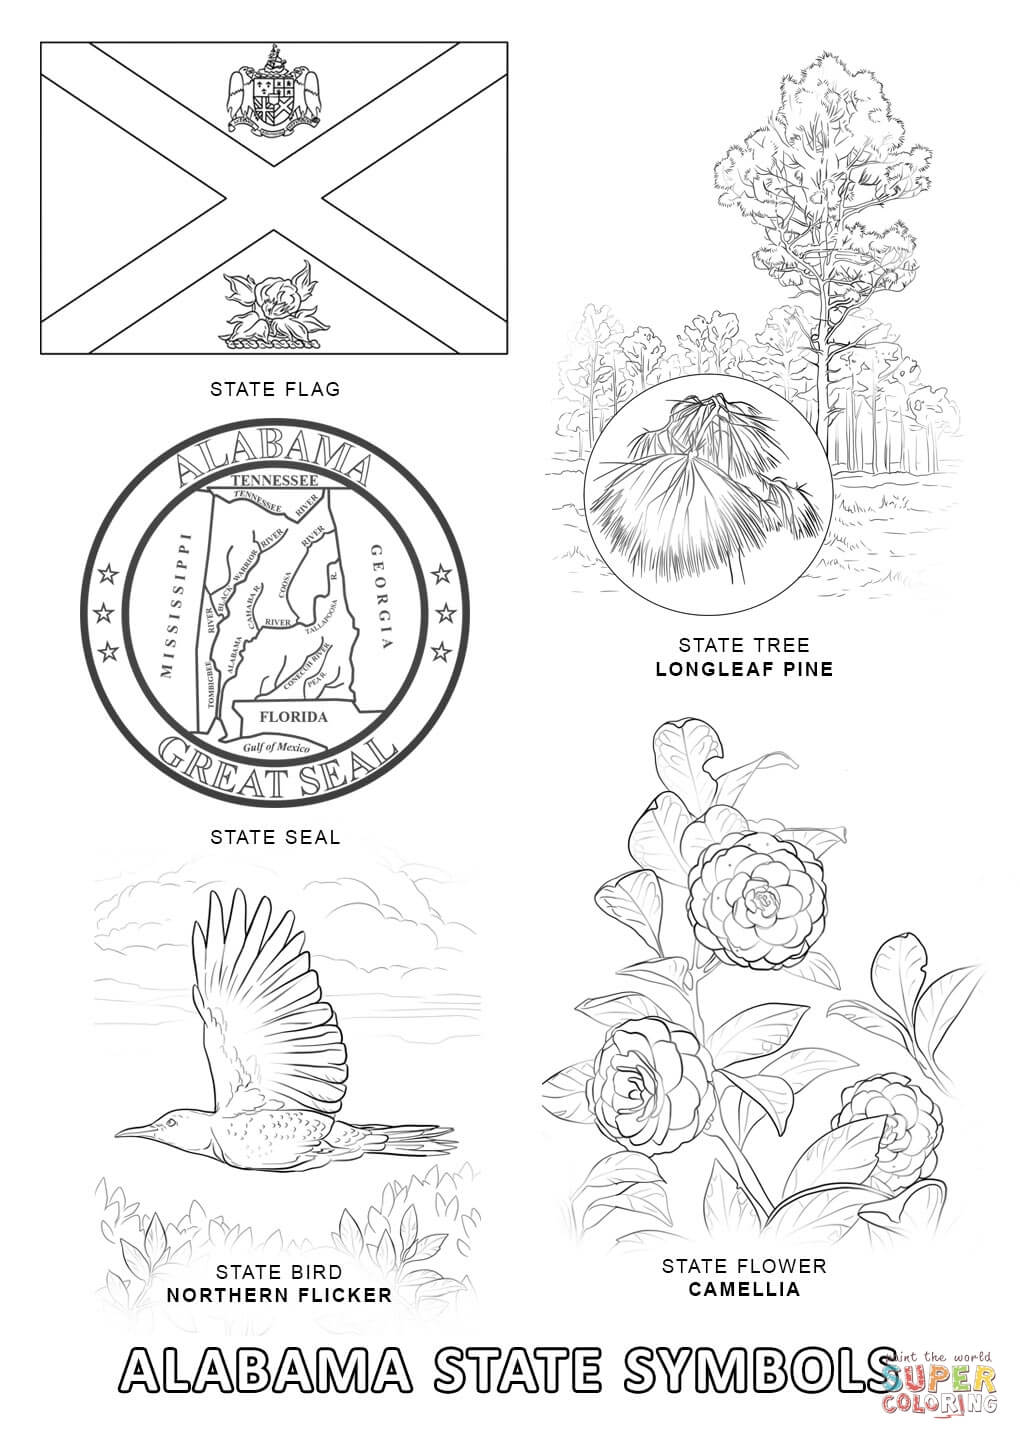 Alabama State Symbols coloring page | Free Printable Coloring Pages